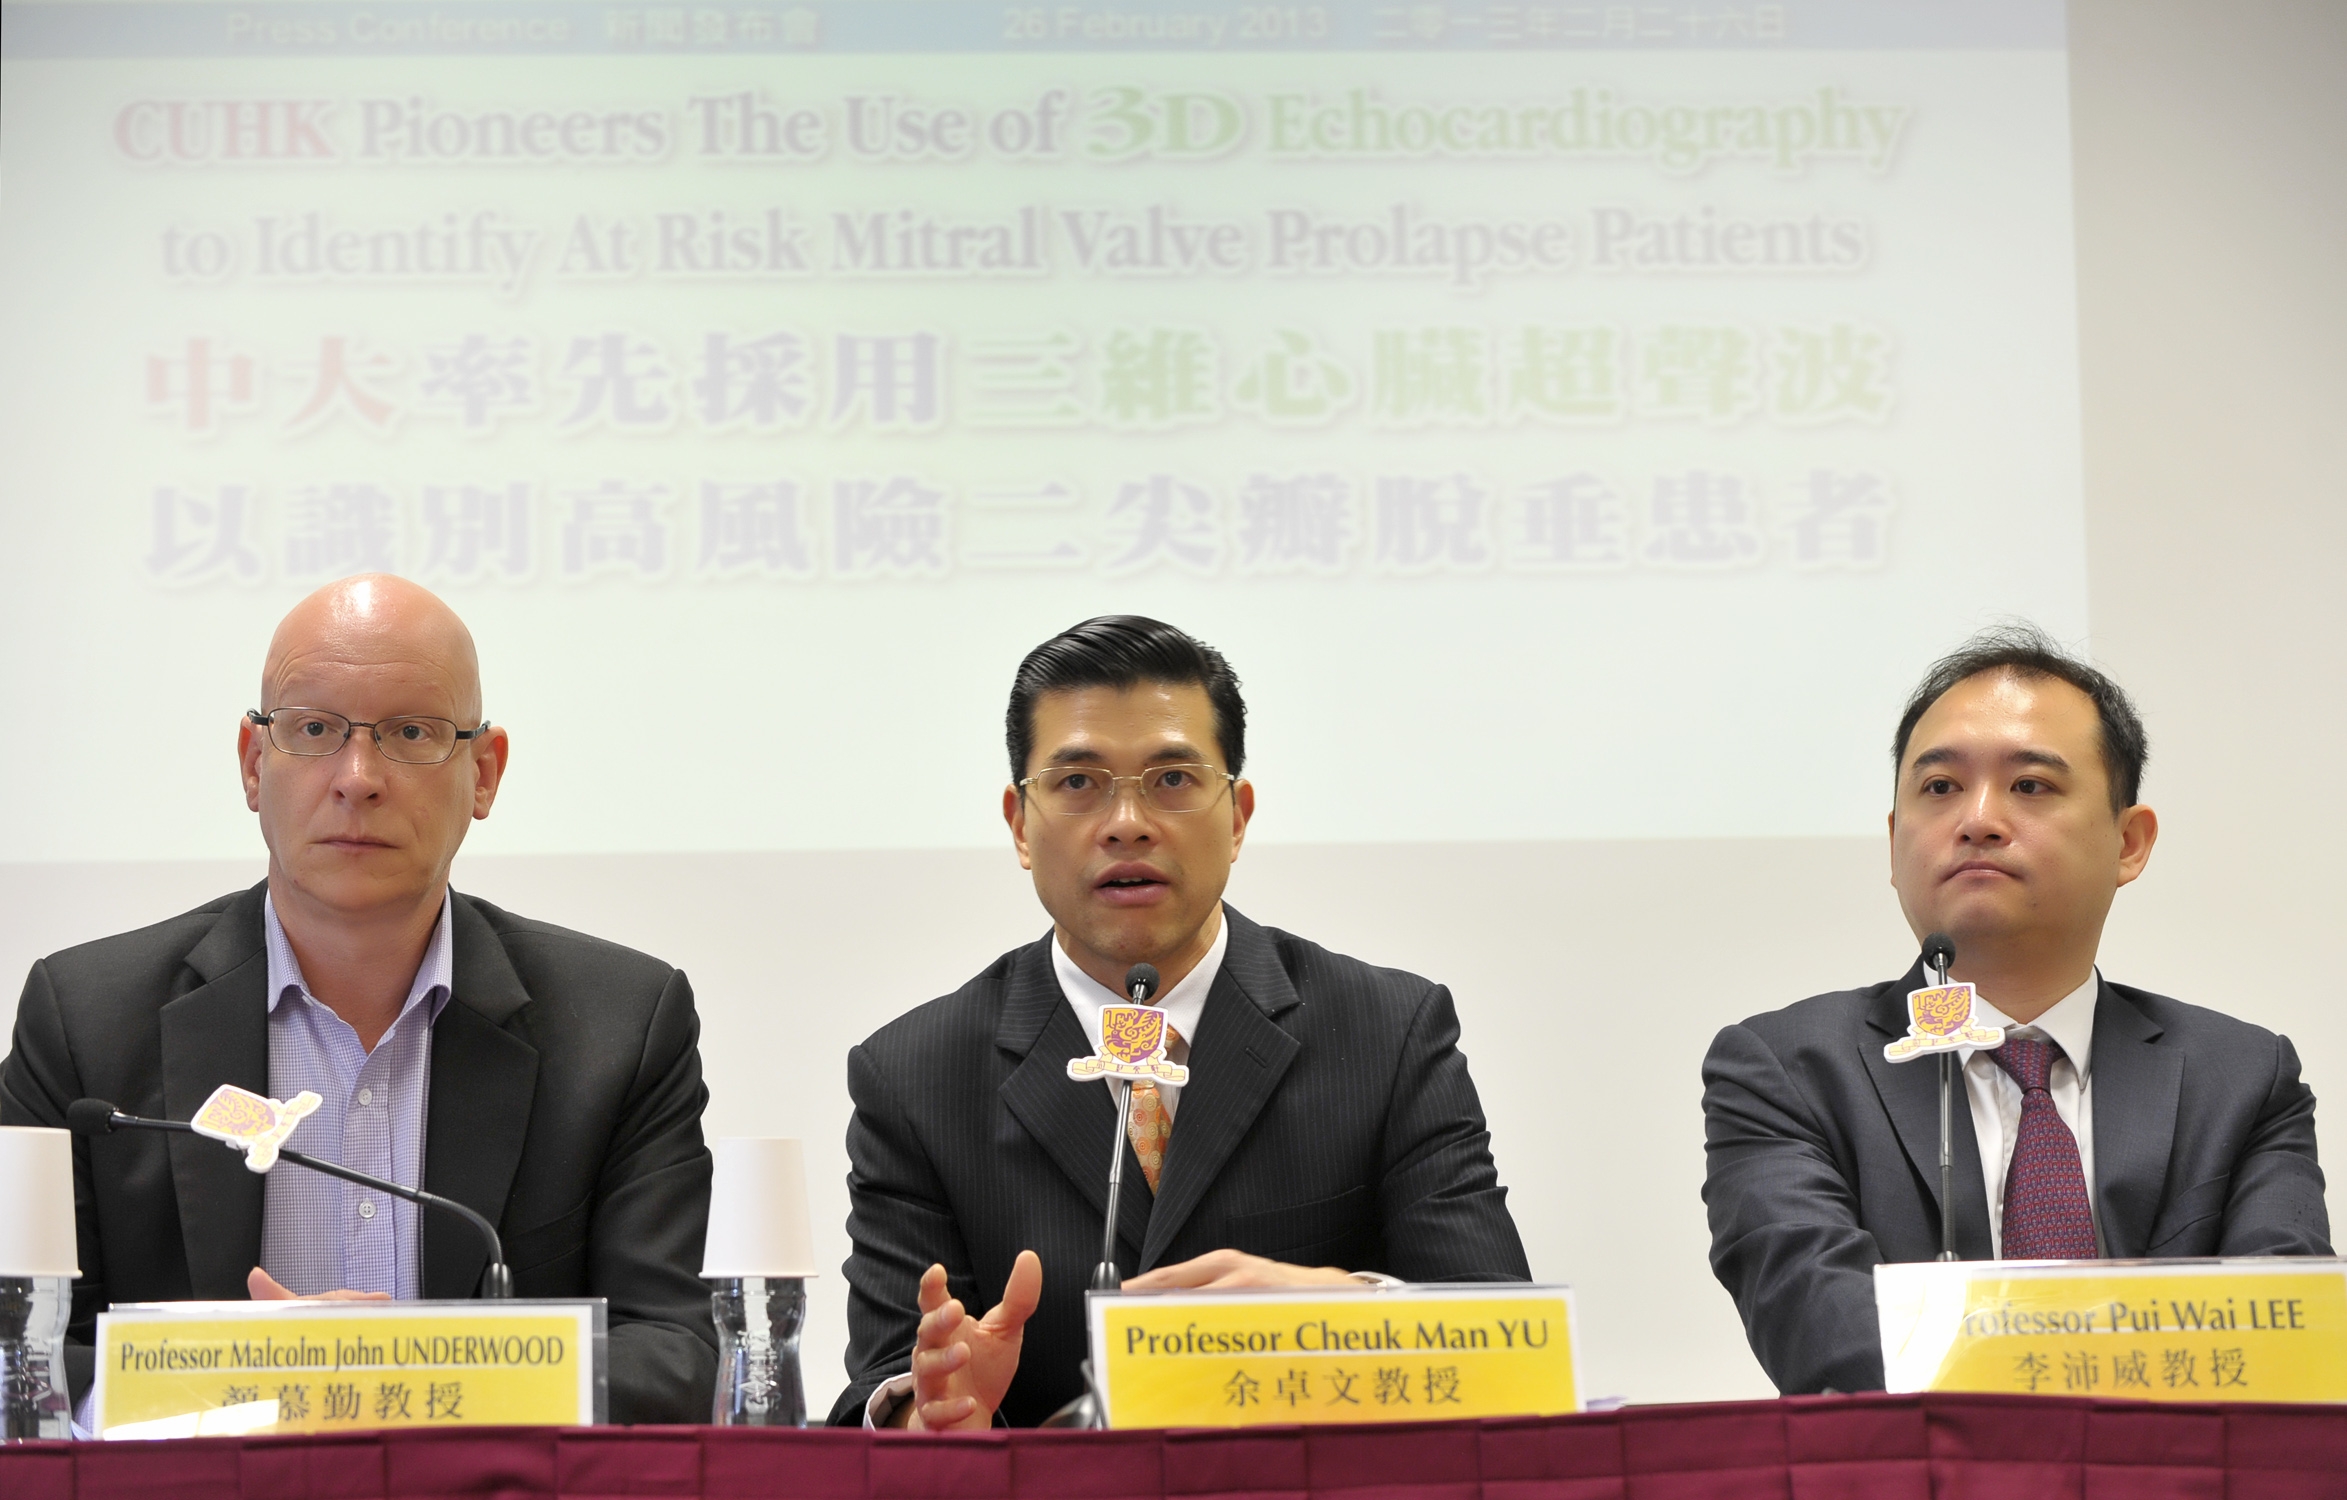 (From left) Professor Malcolm J. Underwood, Head of Division of Cardiothoracic Surgery, Department of Surgery; Professor Cheuk Man YU, Chairman, Department of Medicine and Therapeutics; and Professor Pui Wai LEE, Assistant Professor, Division of Cardiology at CUHK